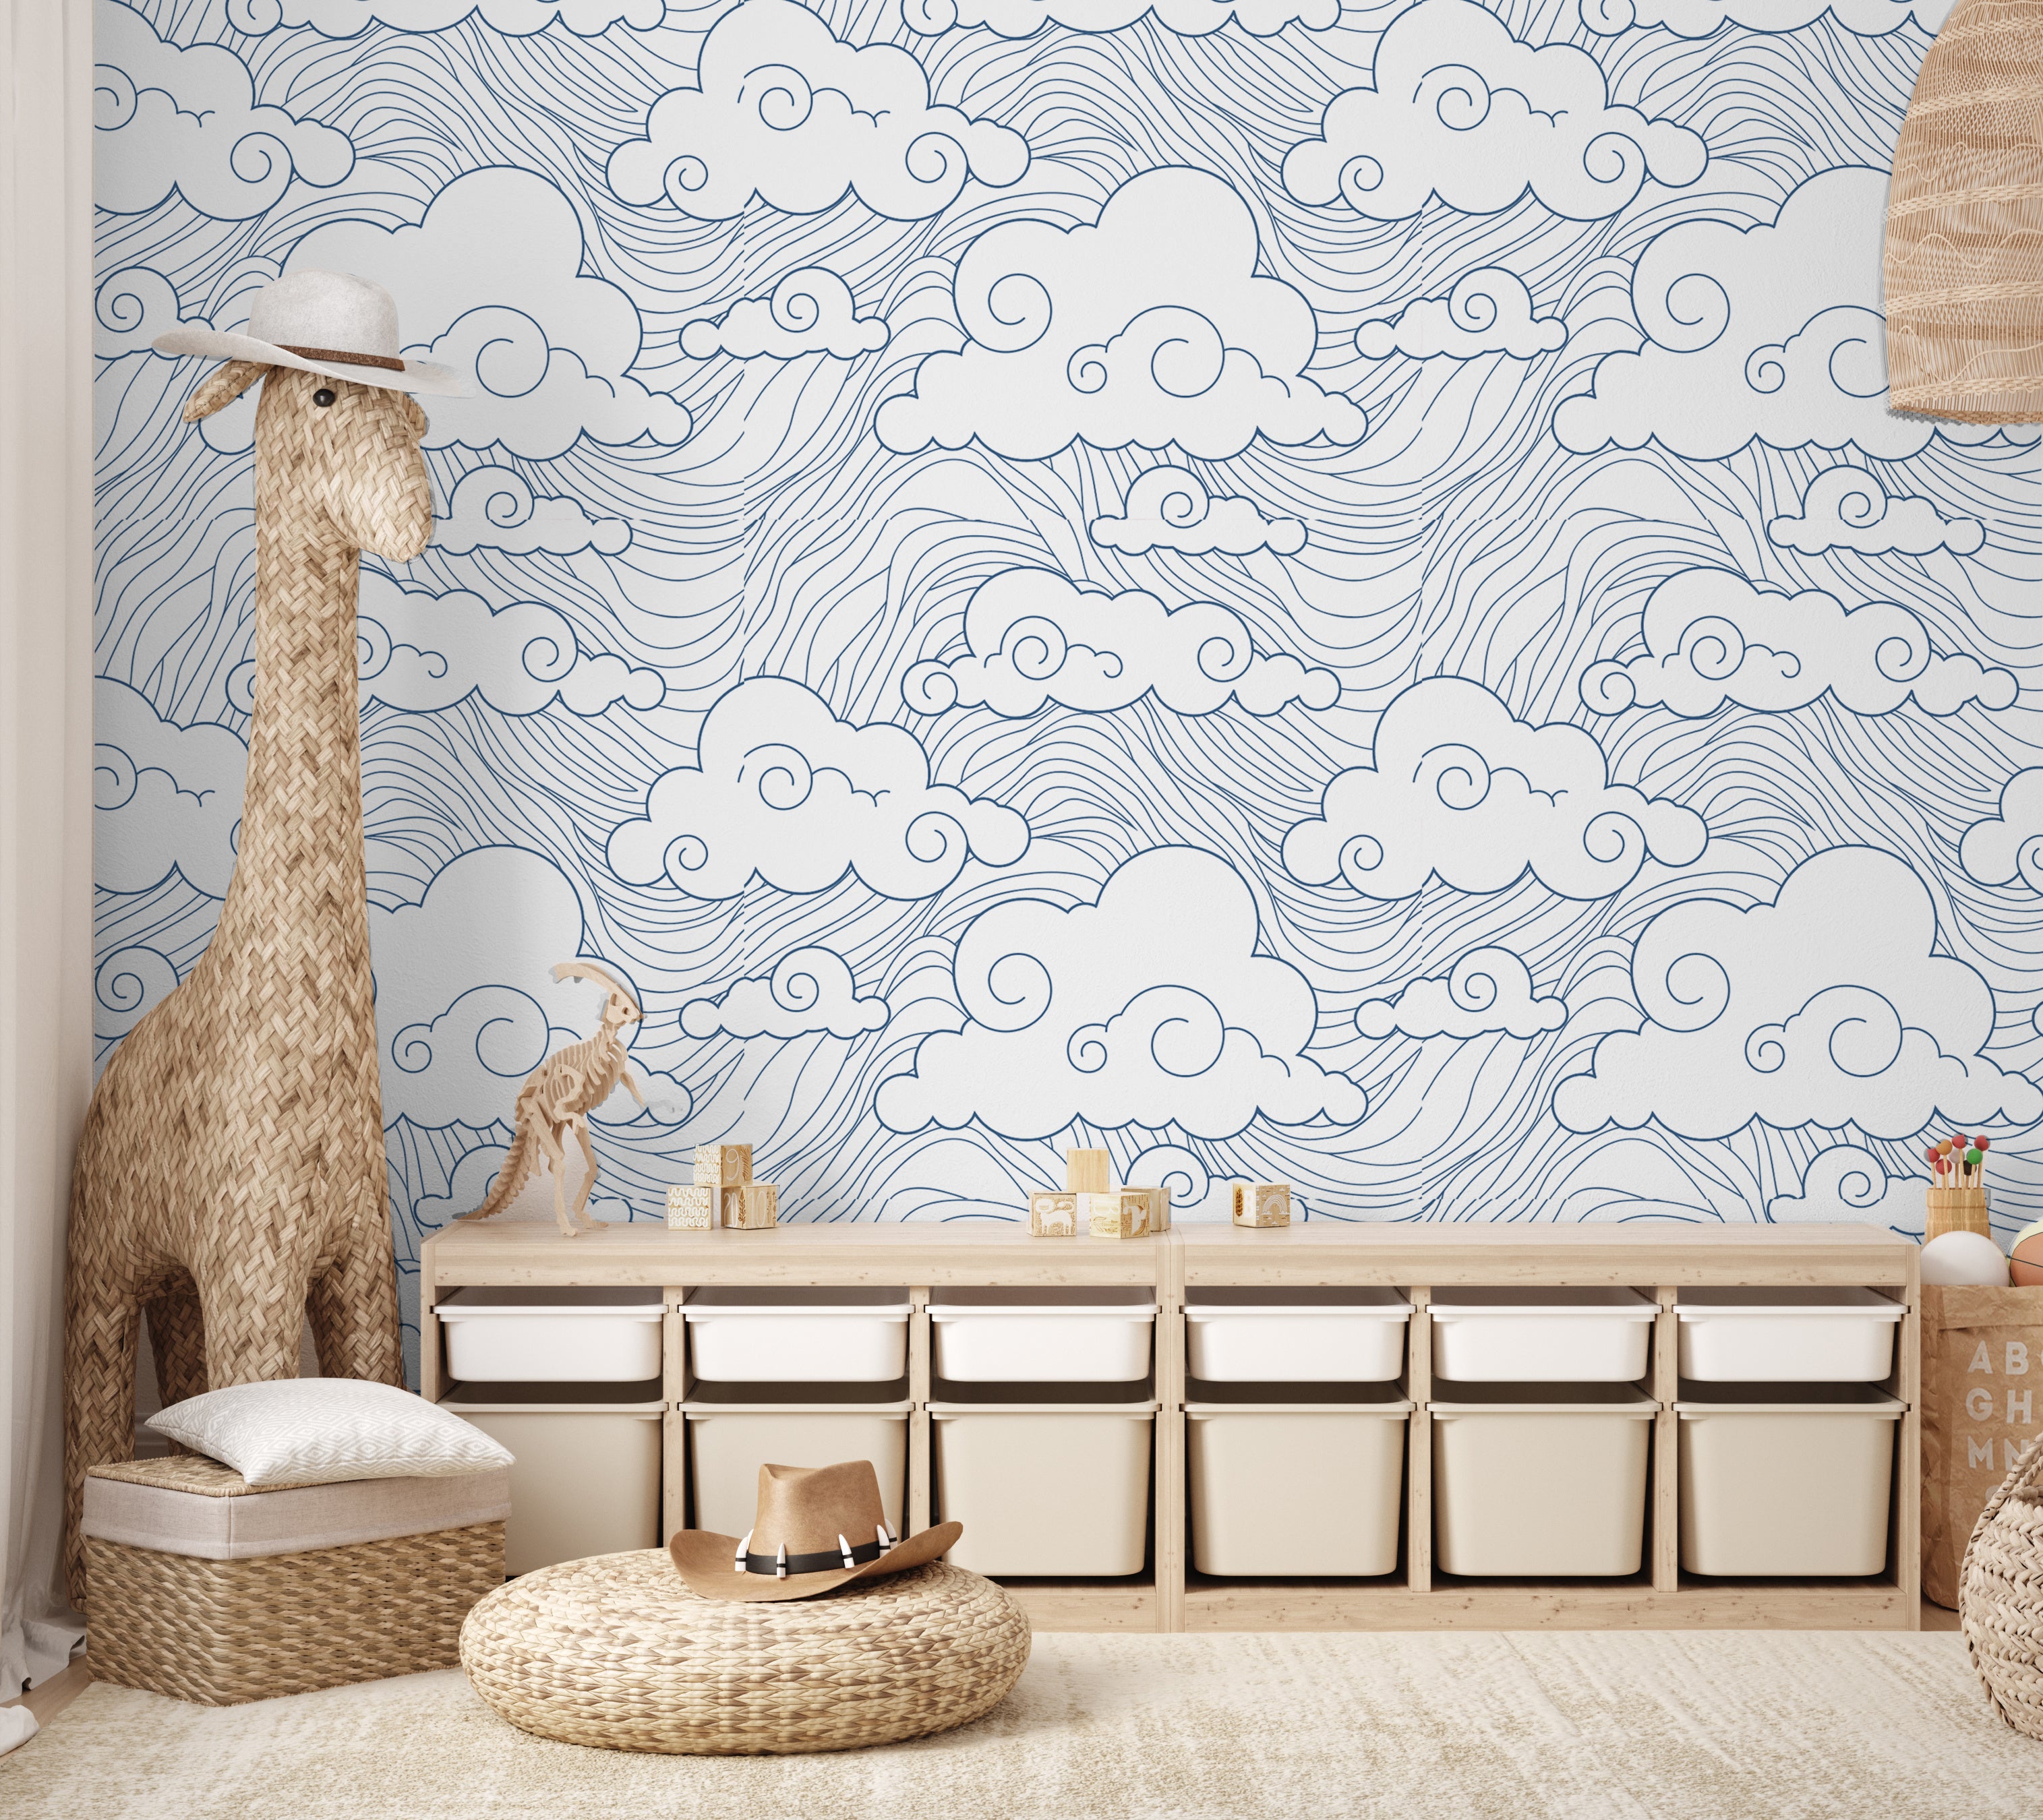 Peel  Stick Wallpaper 9ft x 2ft  Cloudy Sky Stormy Sky Clouds Gray White  Weather Custom Removable Wallpaper by Spoonflower  Walmartcom